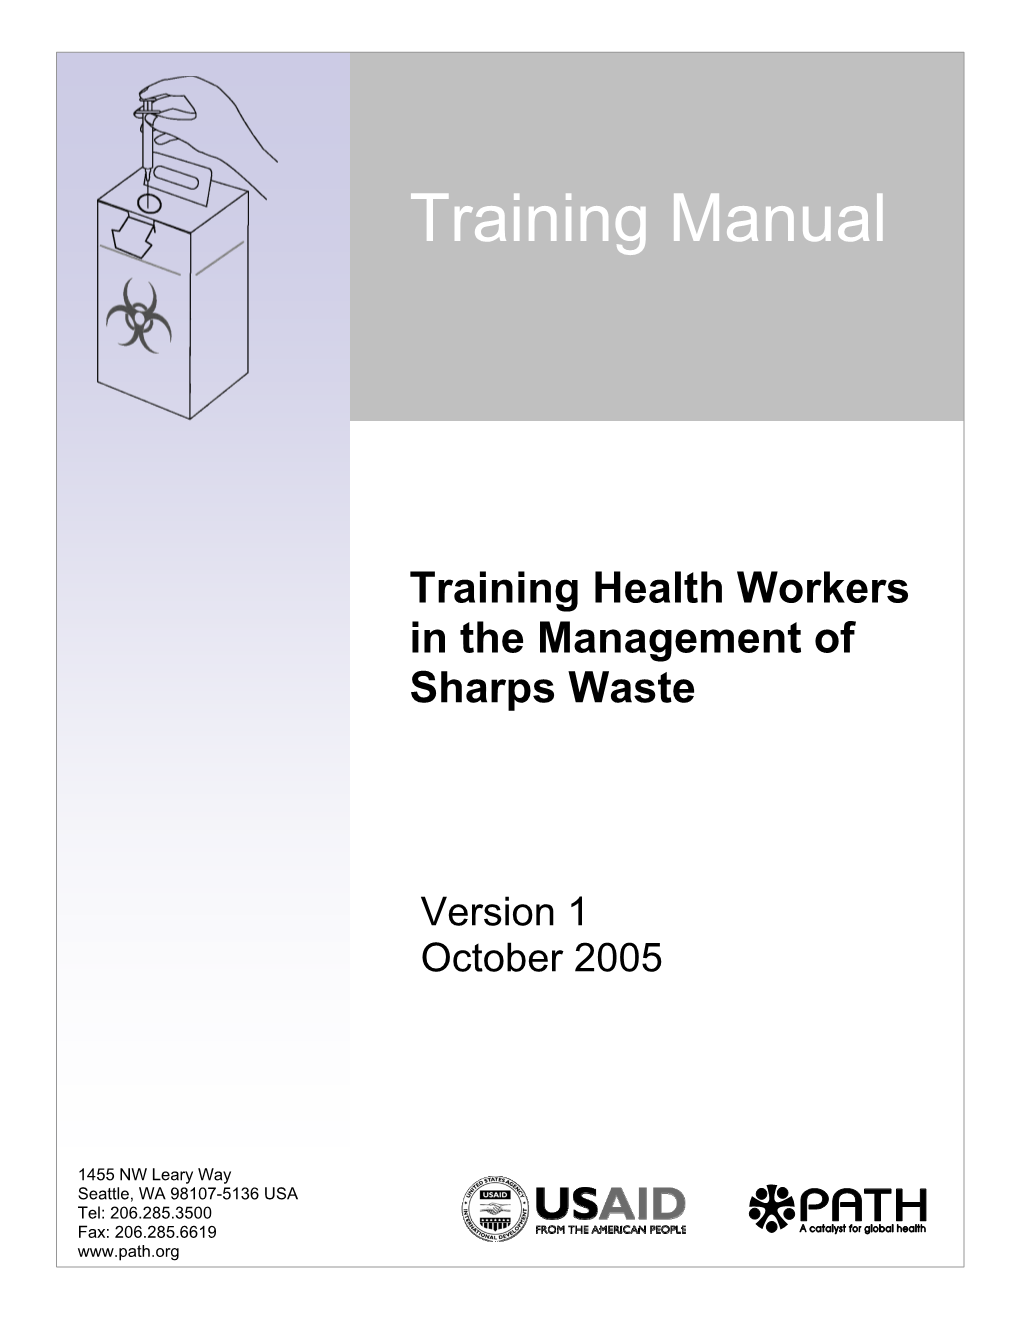 Training Health Workers in the Management of Sharps Waste